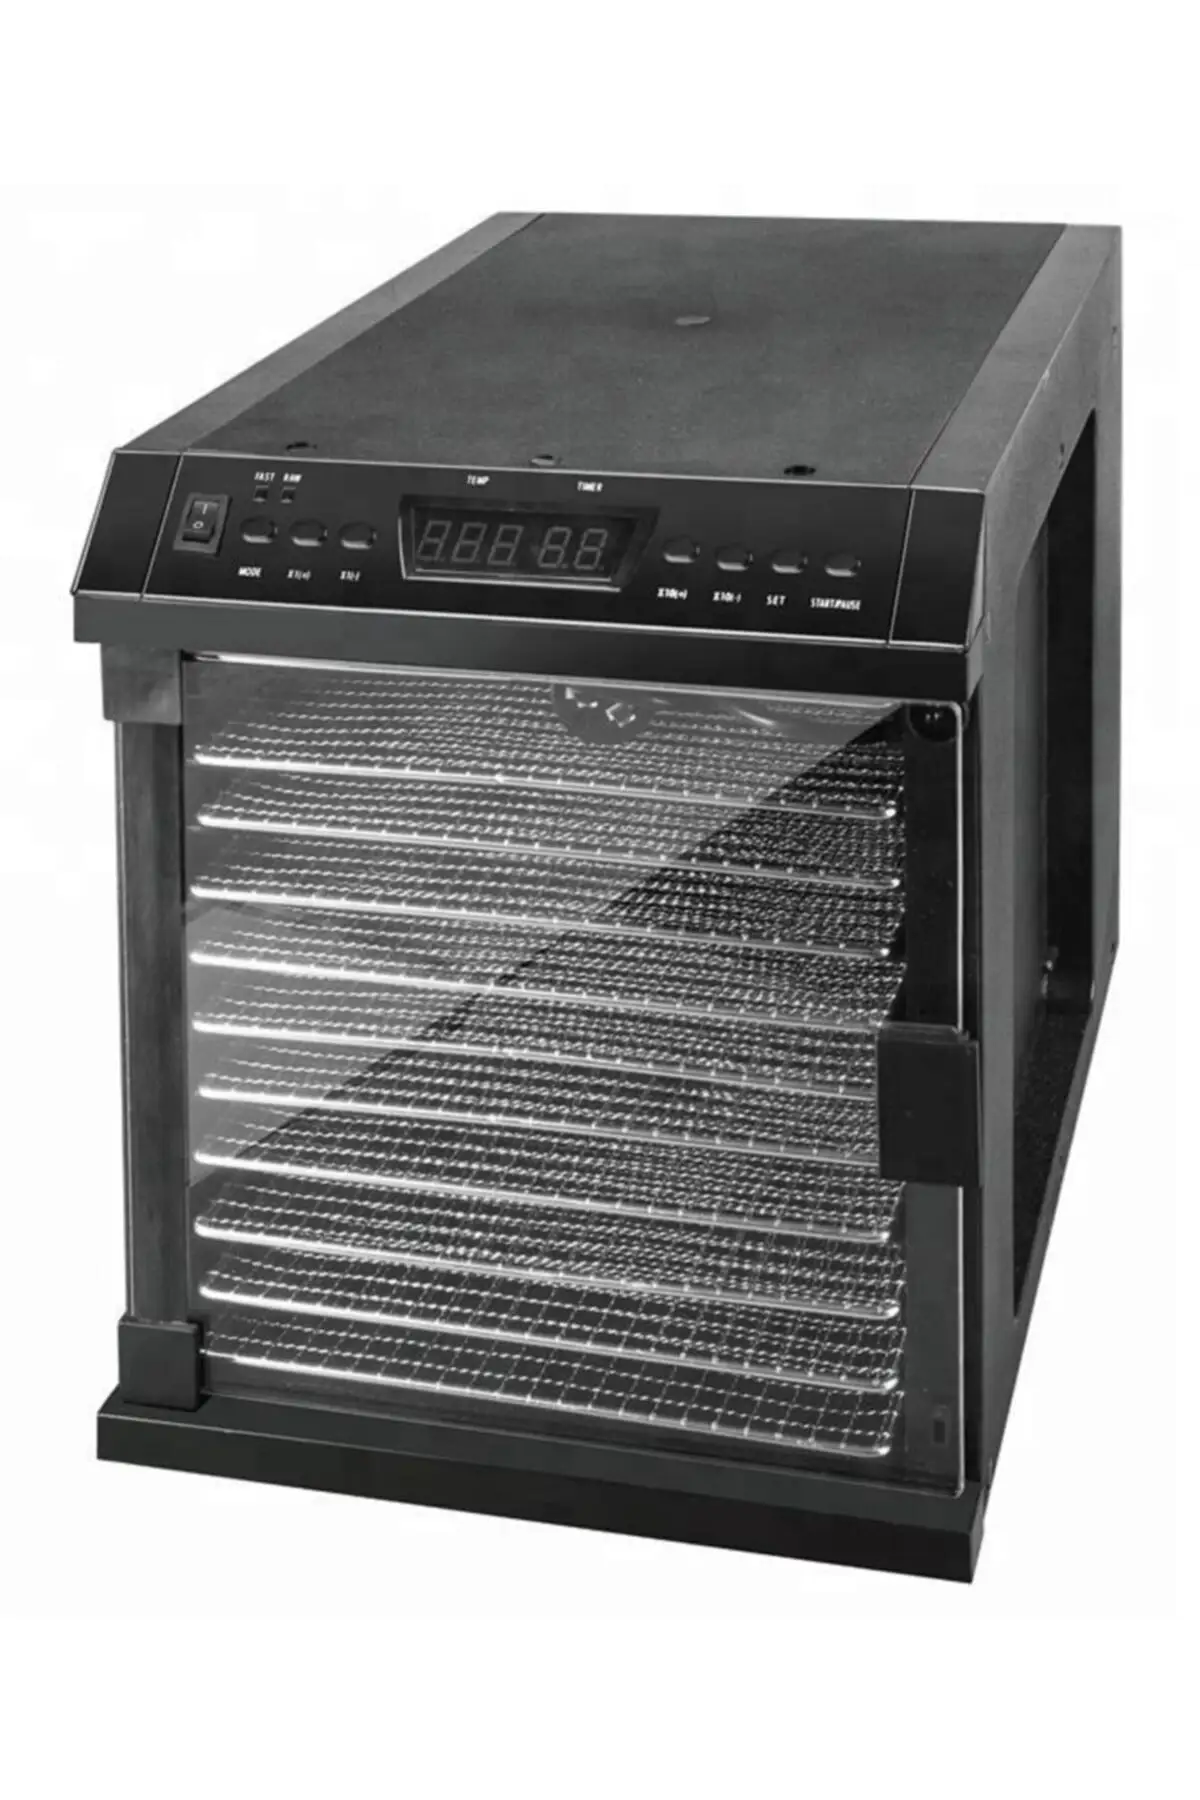 Dalle By1156 Fruit-vegetable Drying Oven